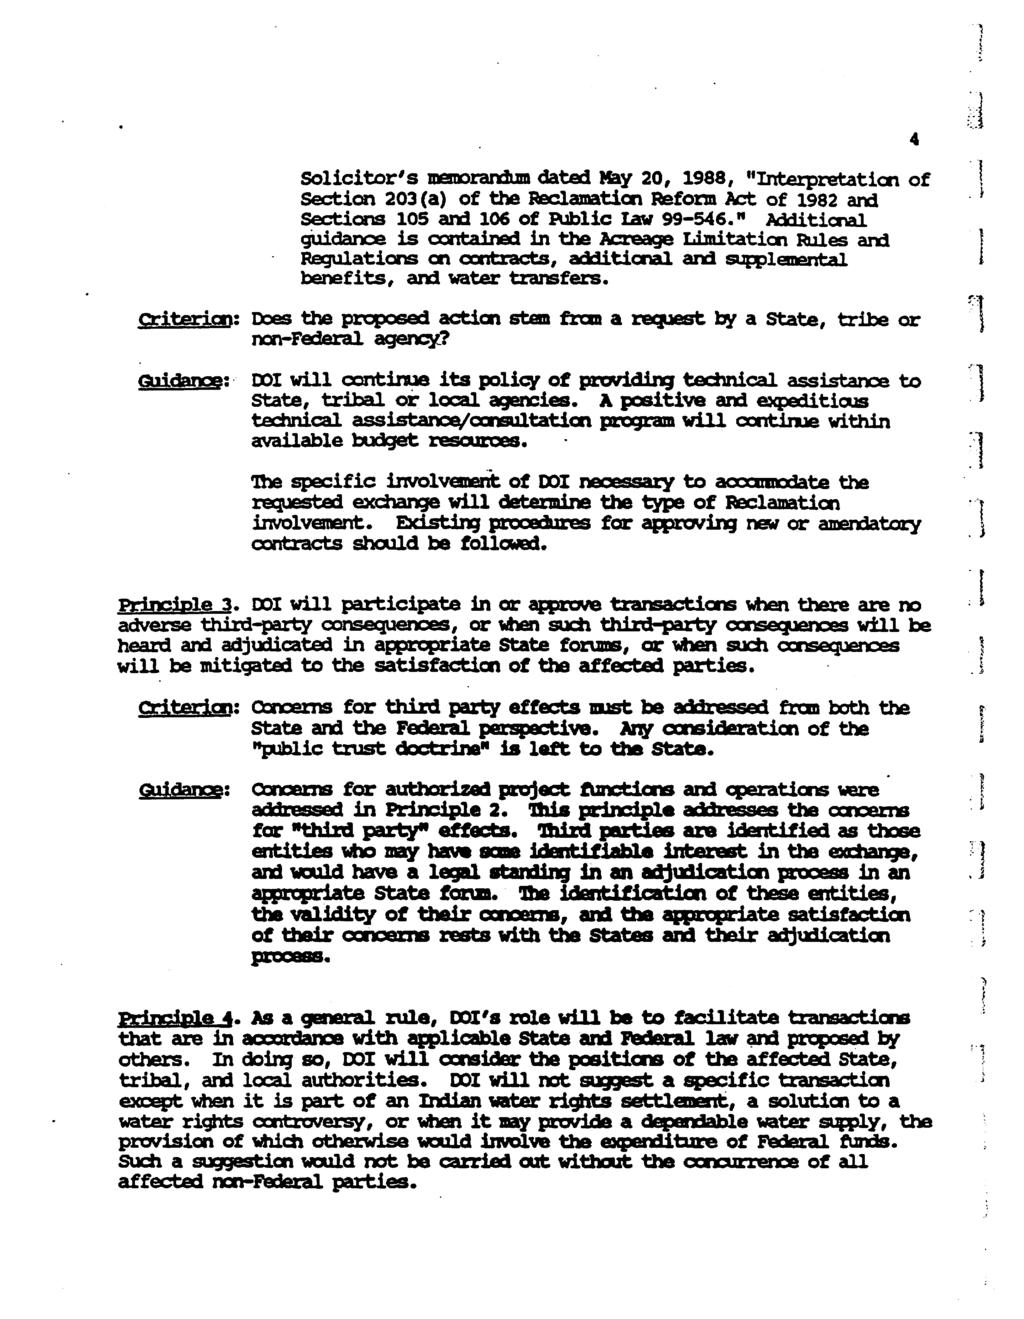 Solicitor's memorandum dated May 20, 1988, "Interpretation of Section 203 (a) of the Reclamation Reform Act of 1982 and Sections 105 and 106 of Public law 99-546.